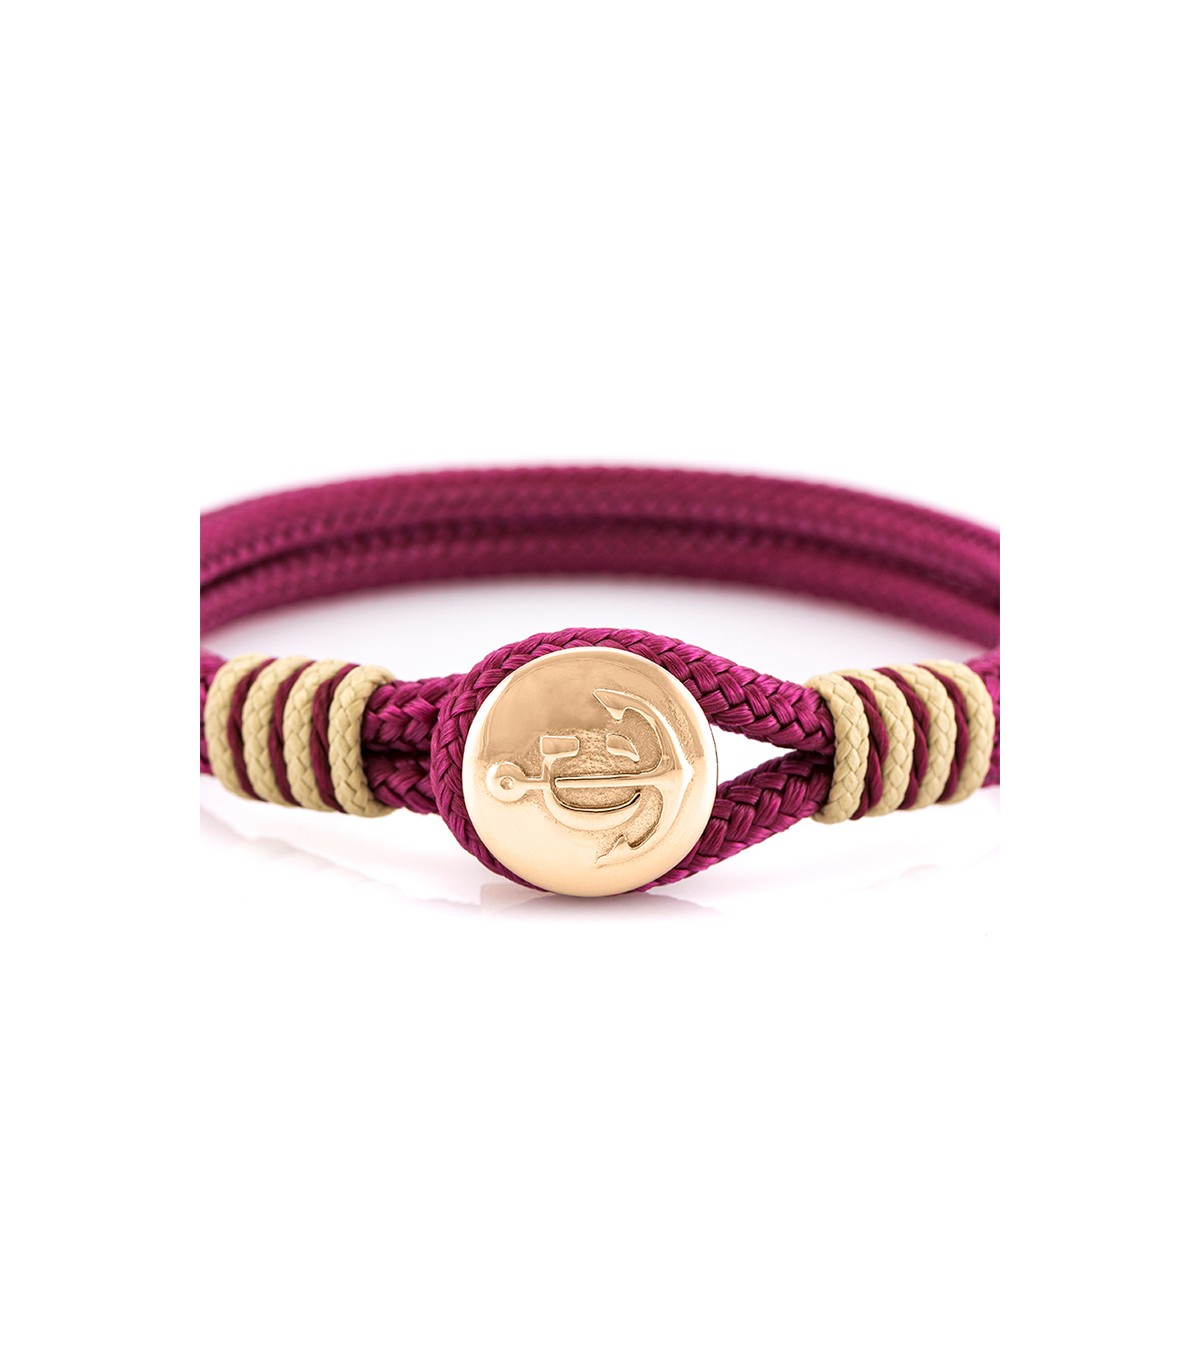 Constantin Maritime Wristband made of sail rope, red